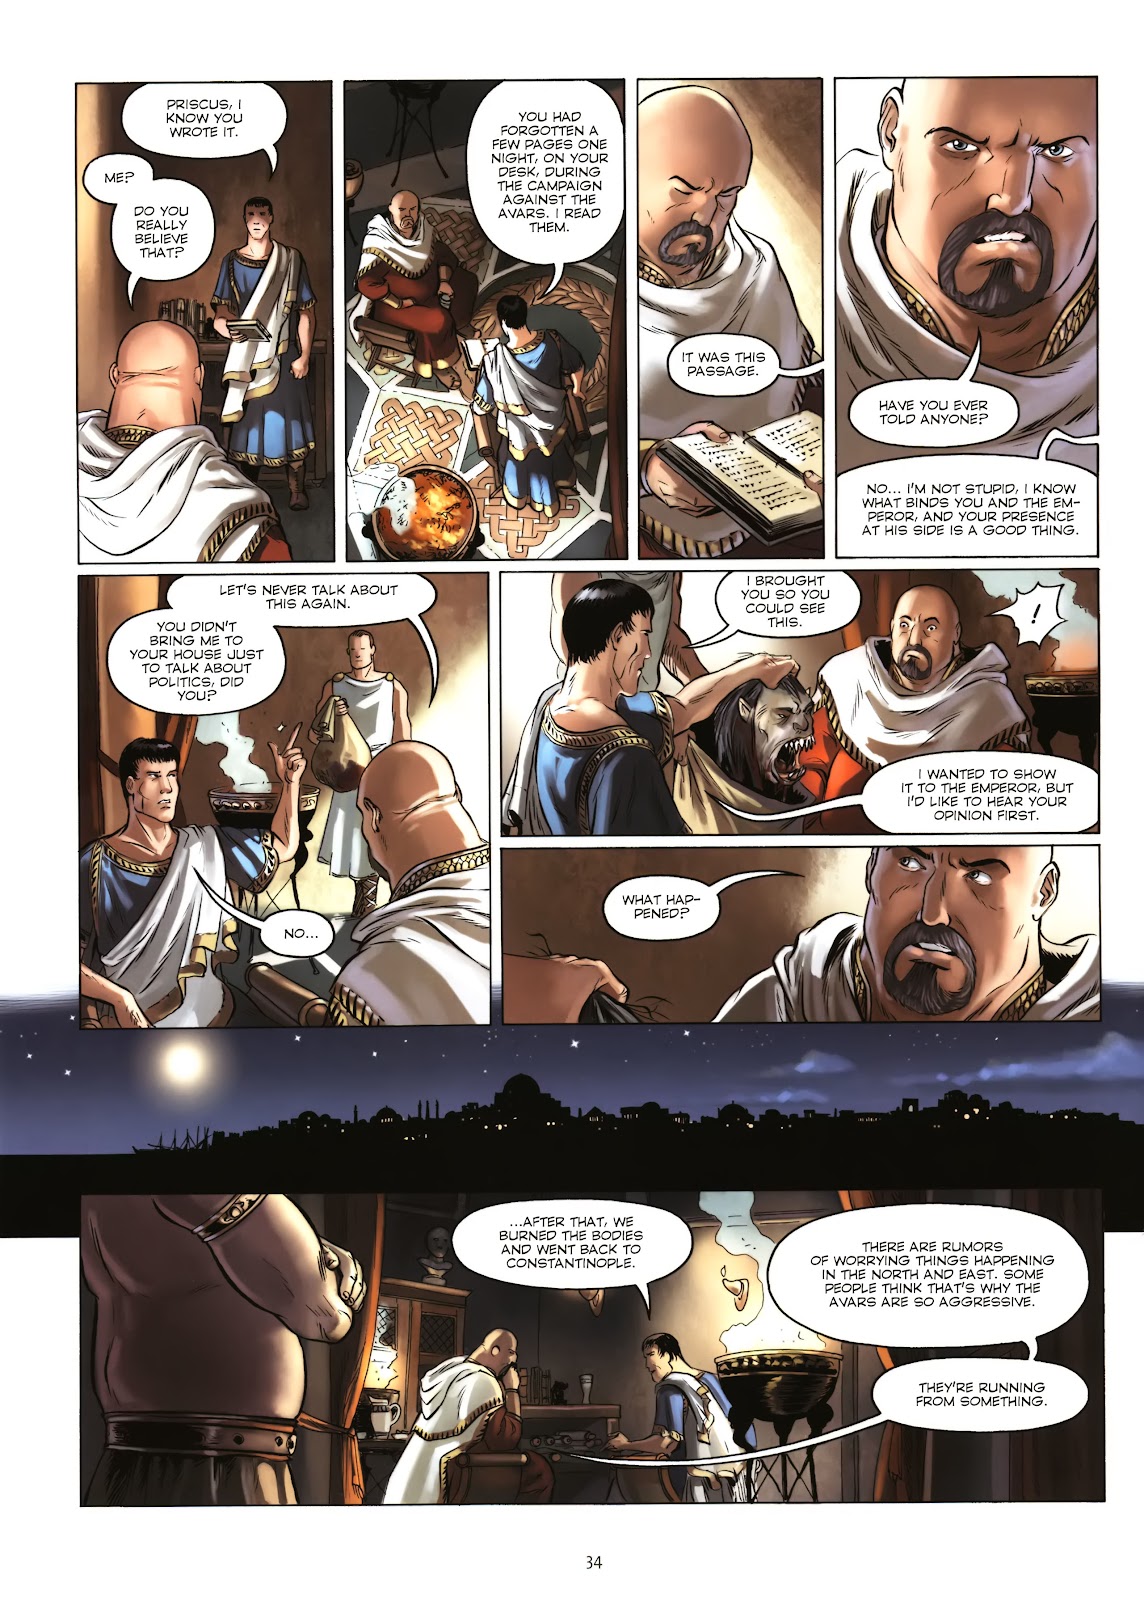 Twilight of the God issue 7 - Page 35